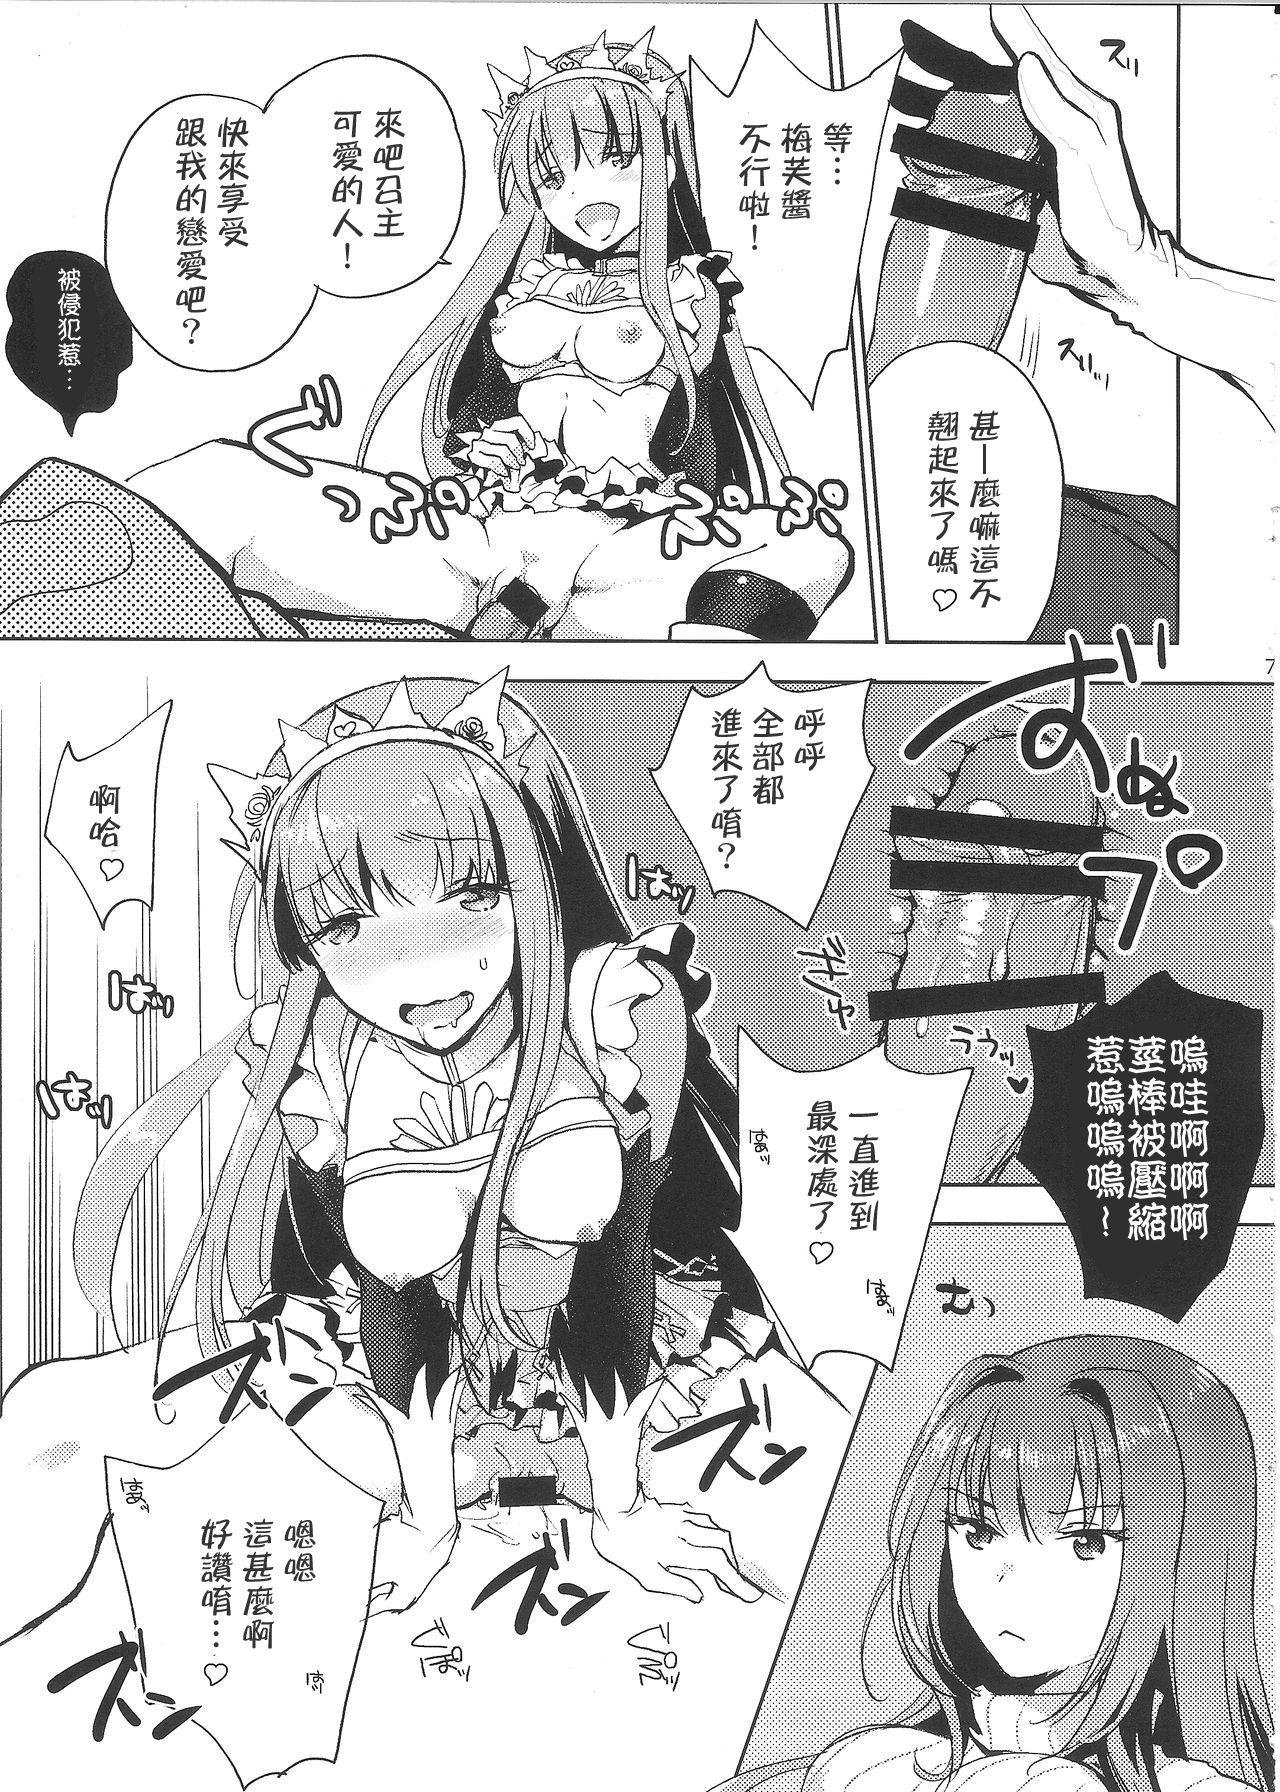 Pregnant BLACK EDITION 2 - Fate grand order Stepsiblings - Page 5